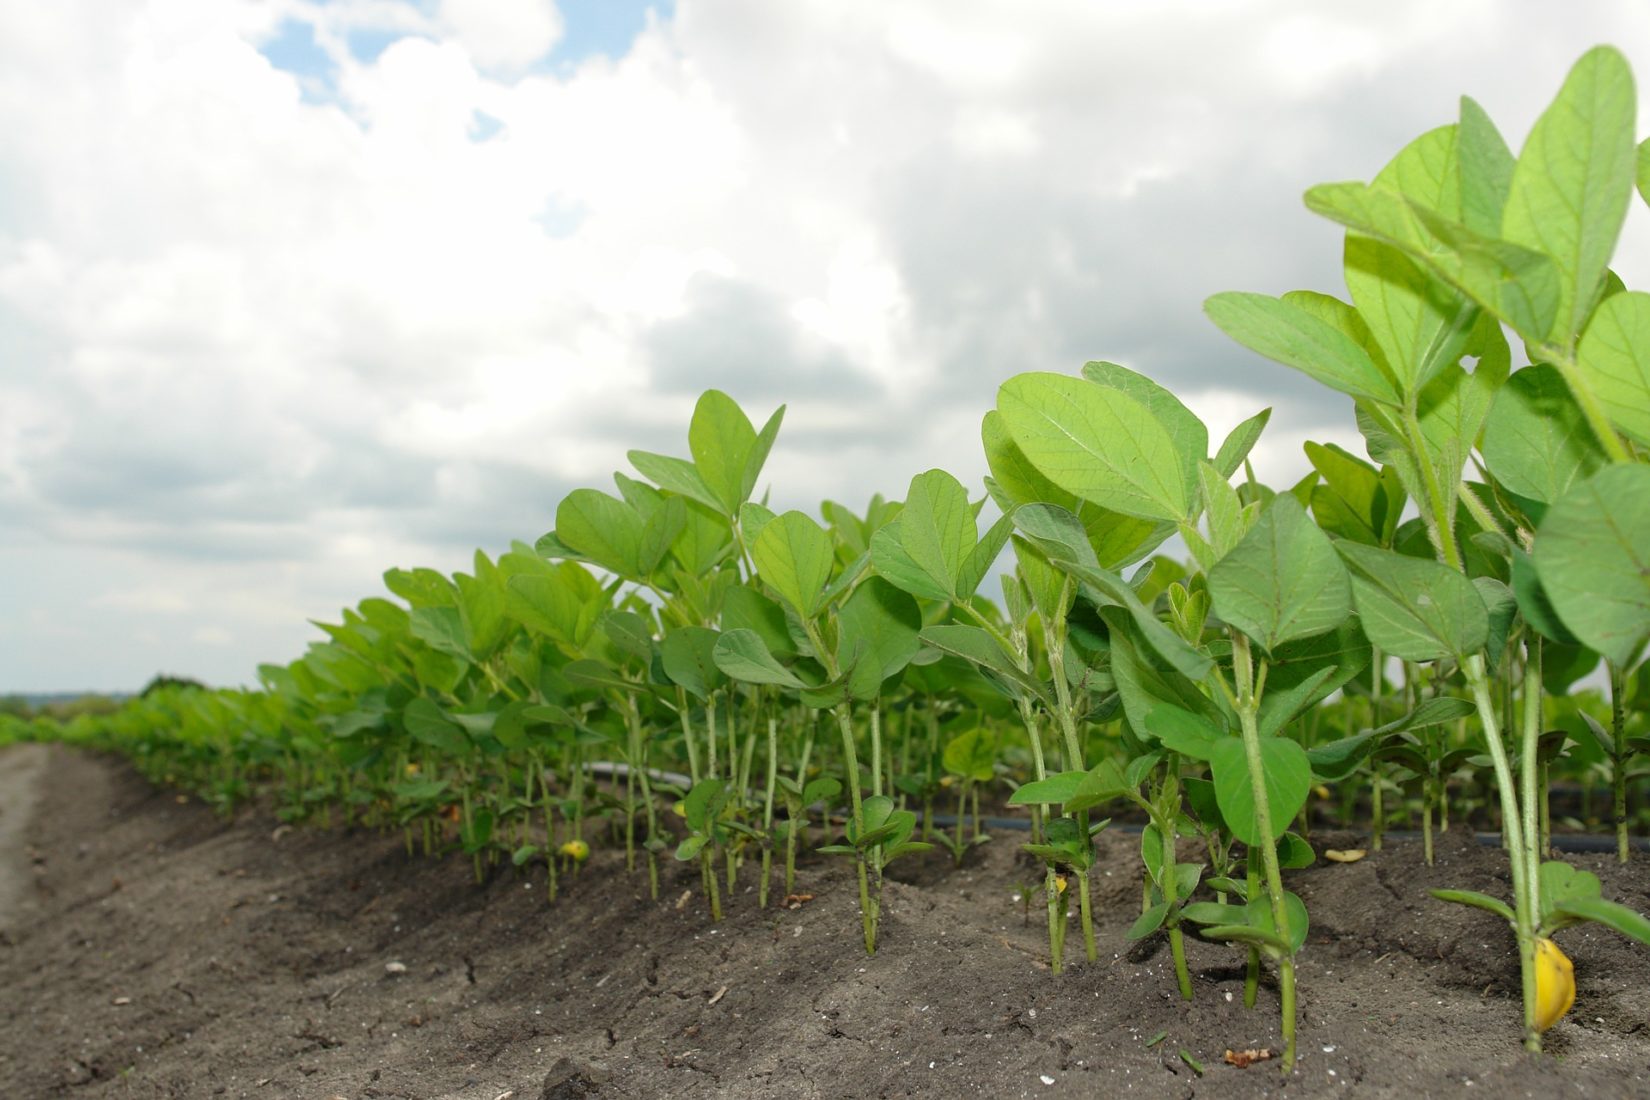 Trade War Disruption Threatens Already Vulnerable Soybean Producers & Supply Chain